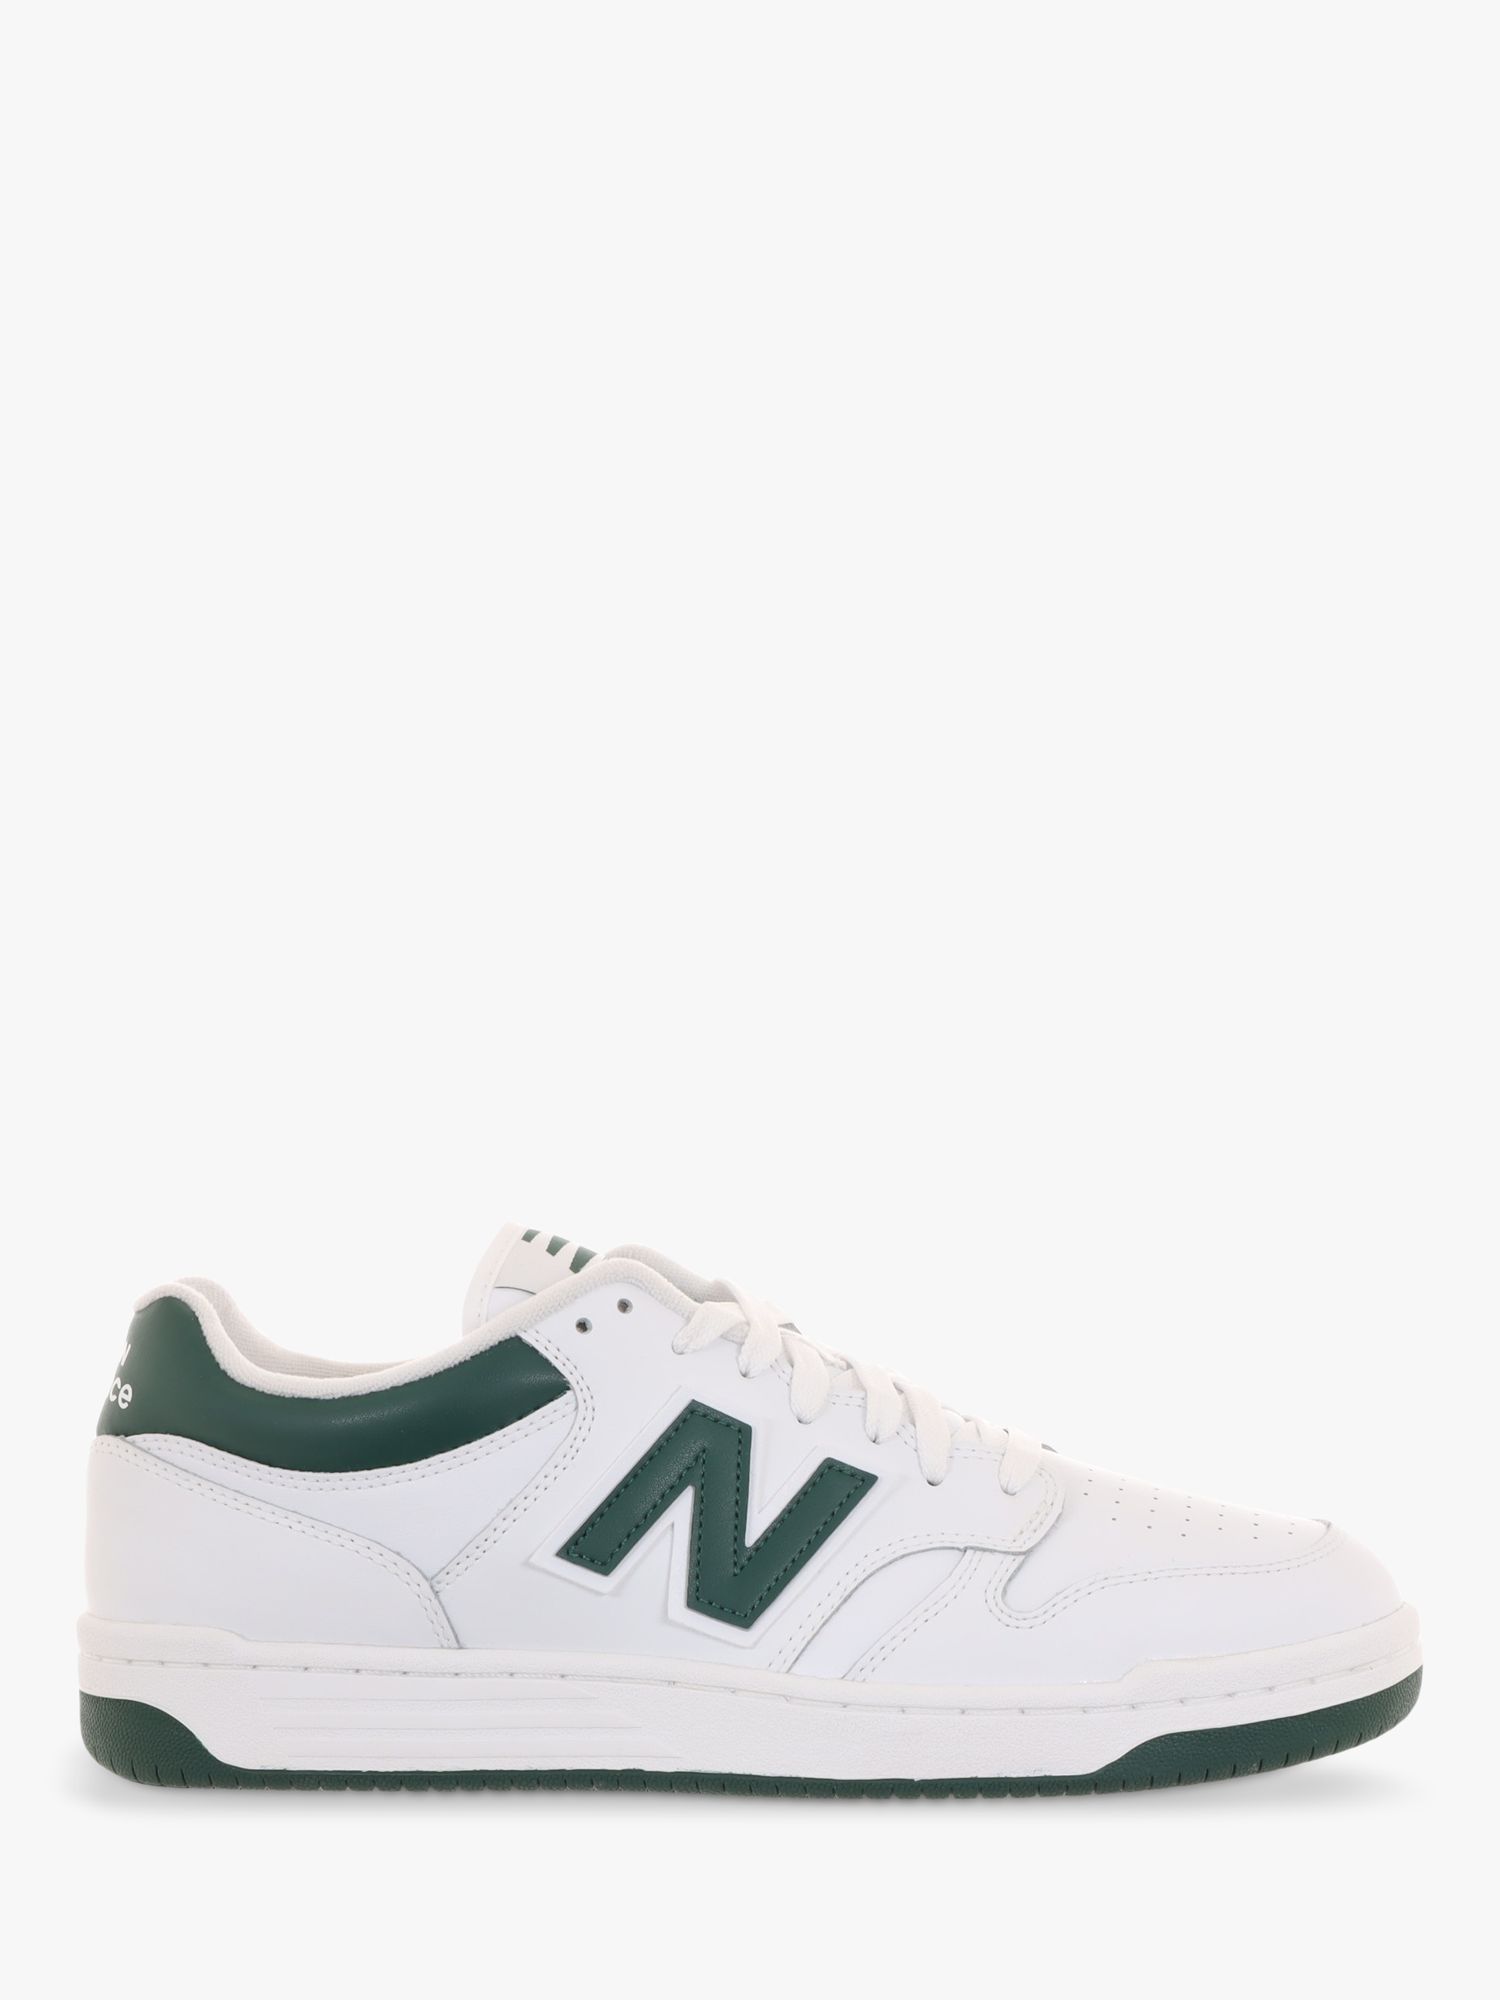 New Balance Hoops Trainers, White/Green, 4